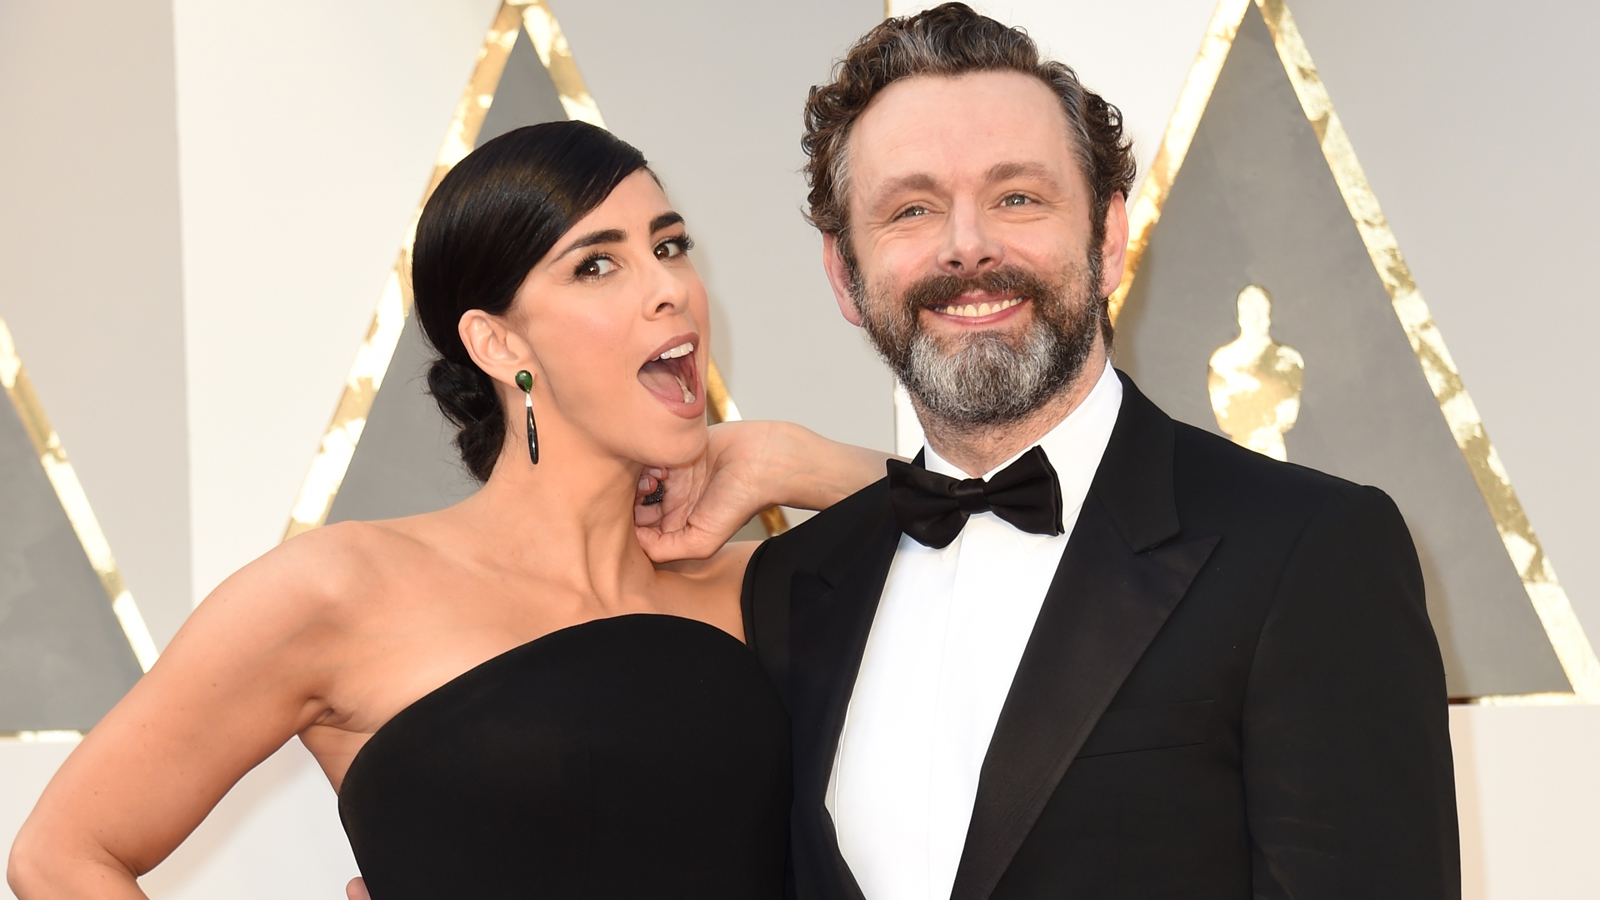 The cutest couples at the Oscars